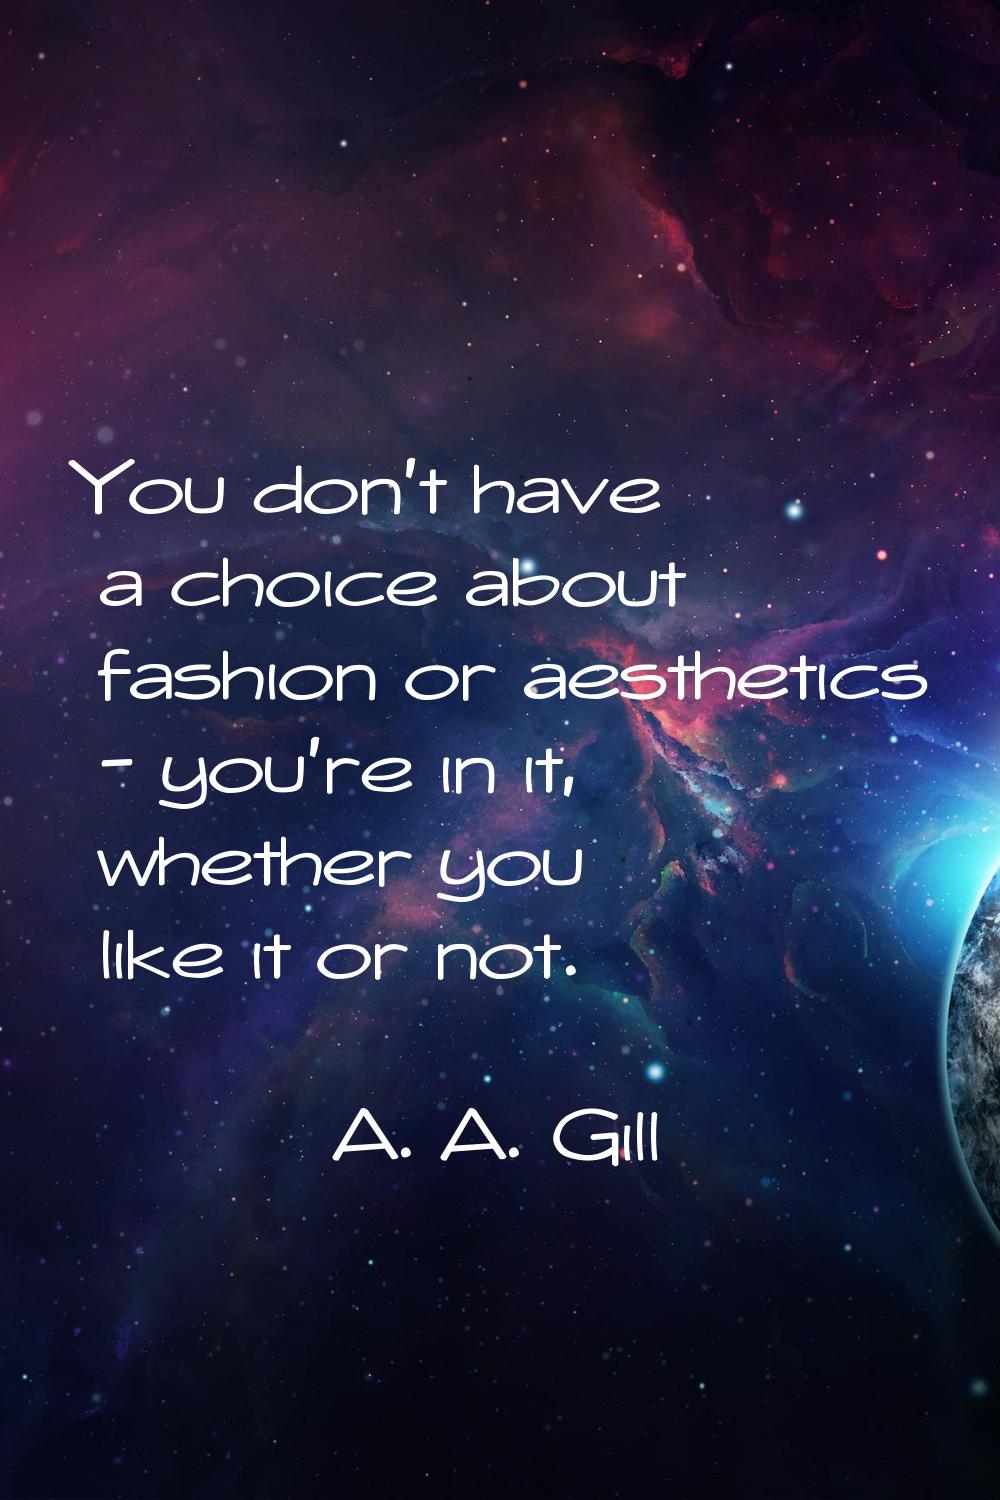 You don't have a choice about fashion or aesthetics - you're in it, whether you like it or not.